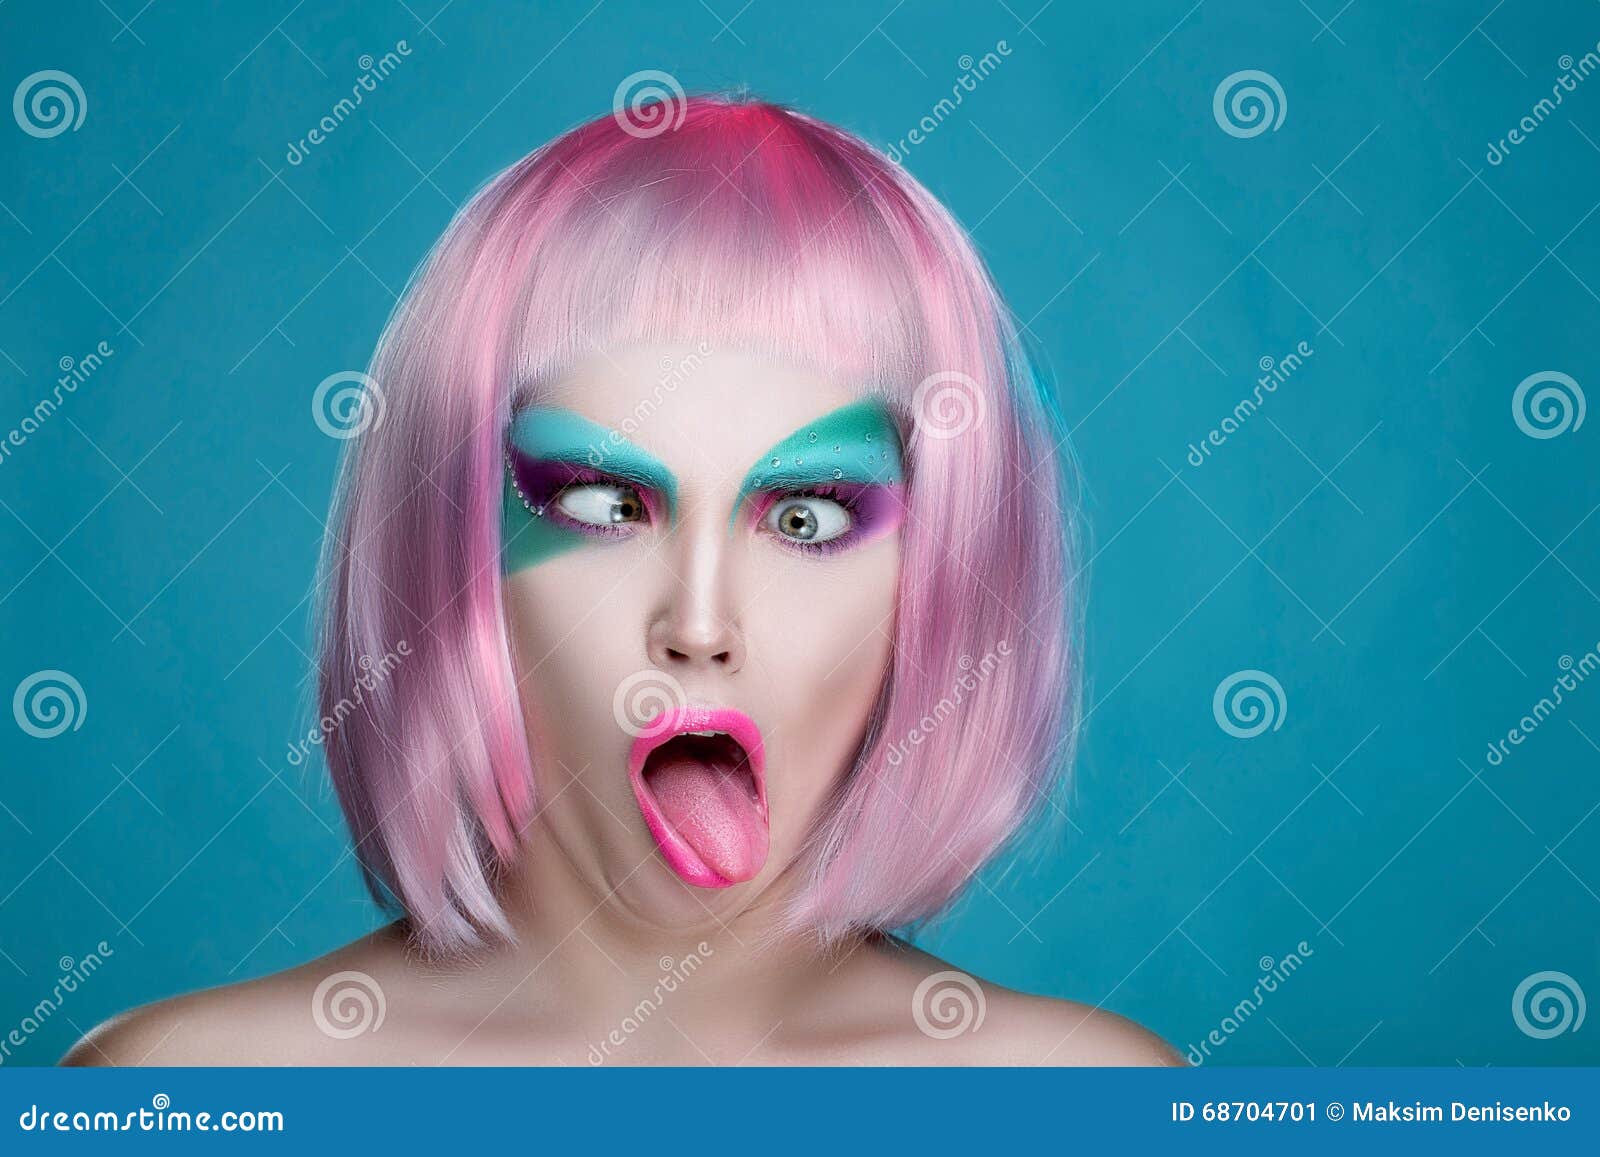 Shocked Girl With Bulging Wide Open Eyes And Open Mouth Pin Stock Image Image Of Close Lips 